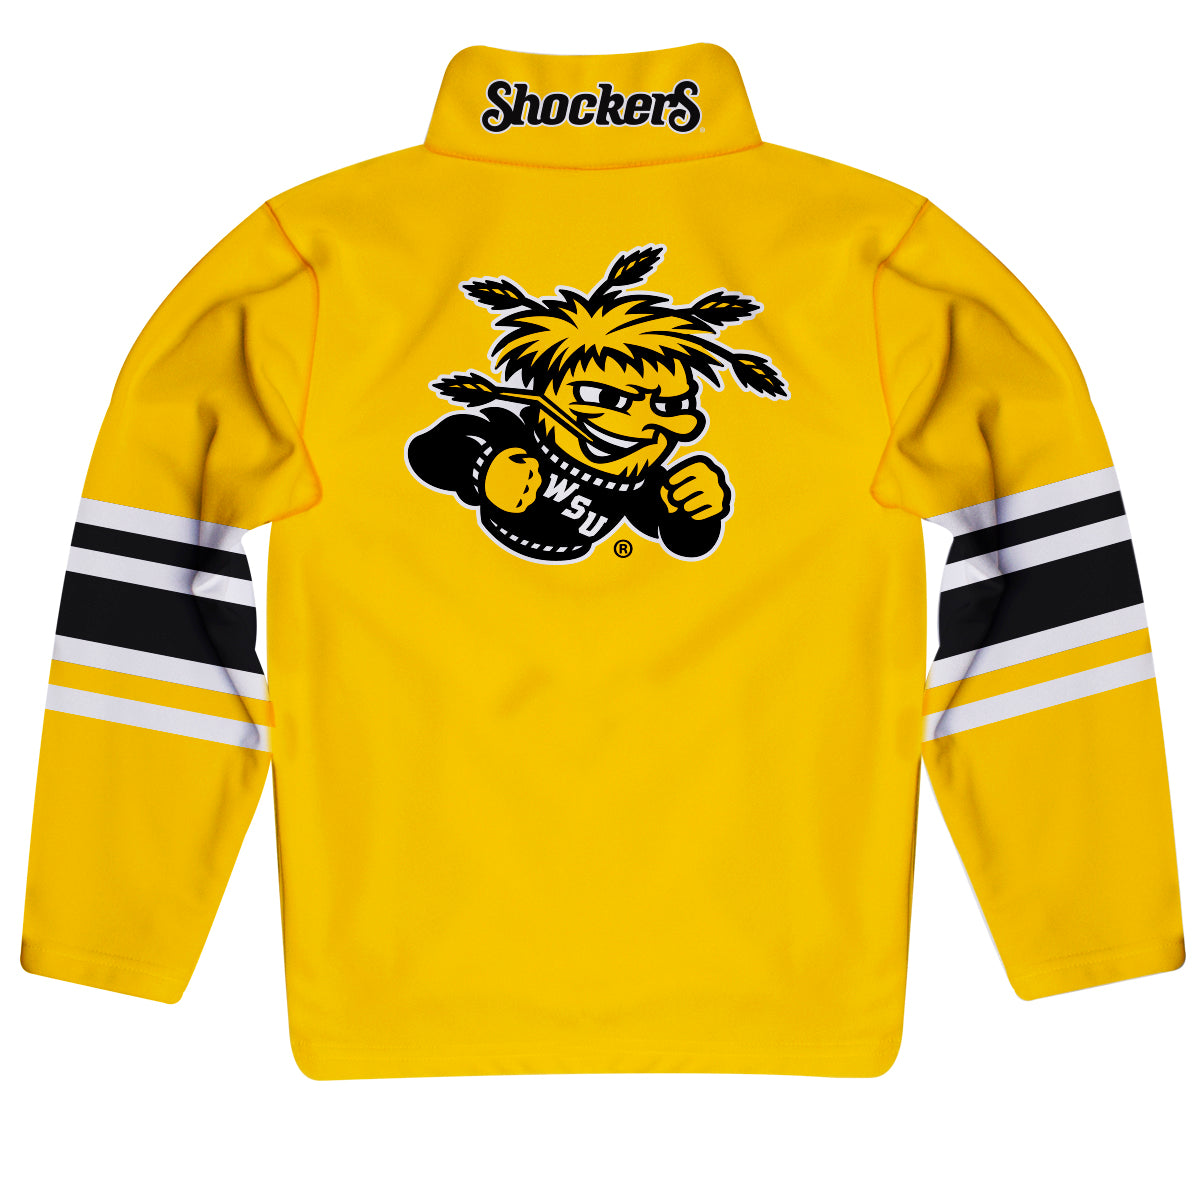 Wichita State Shockers WSU Game Day Yellow Quarter Zip Pullover for Infants Toddlers by Vive La Fete